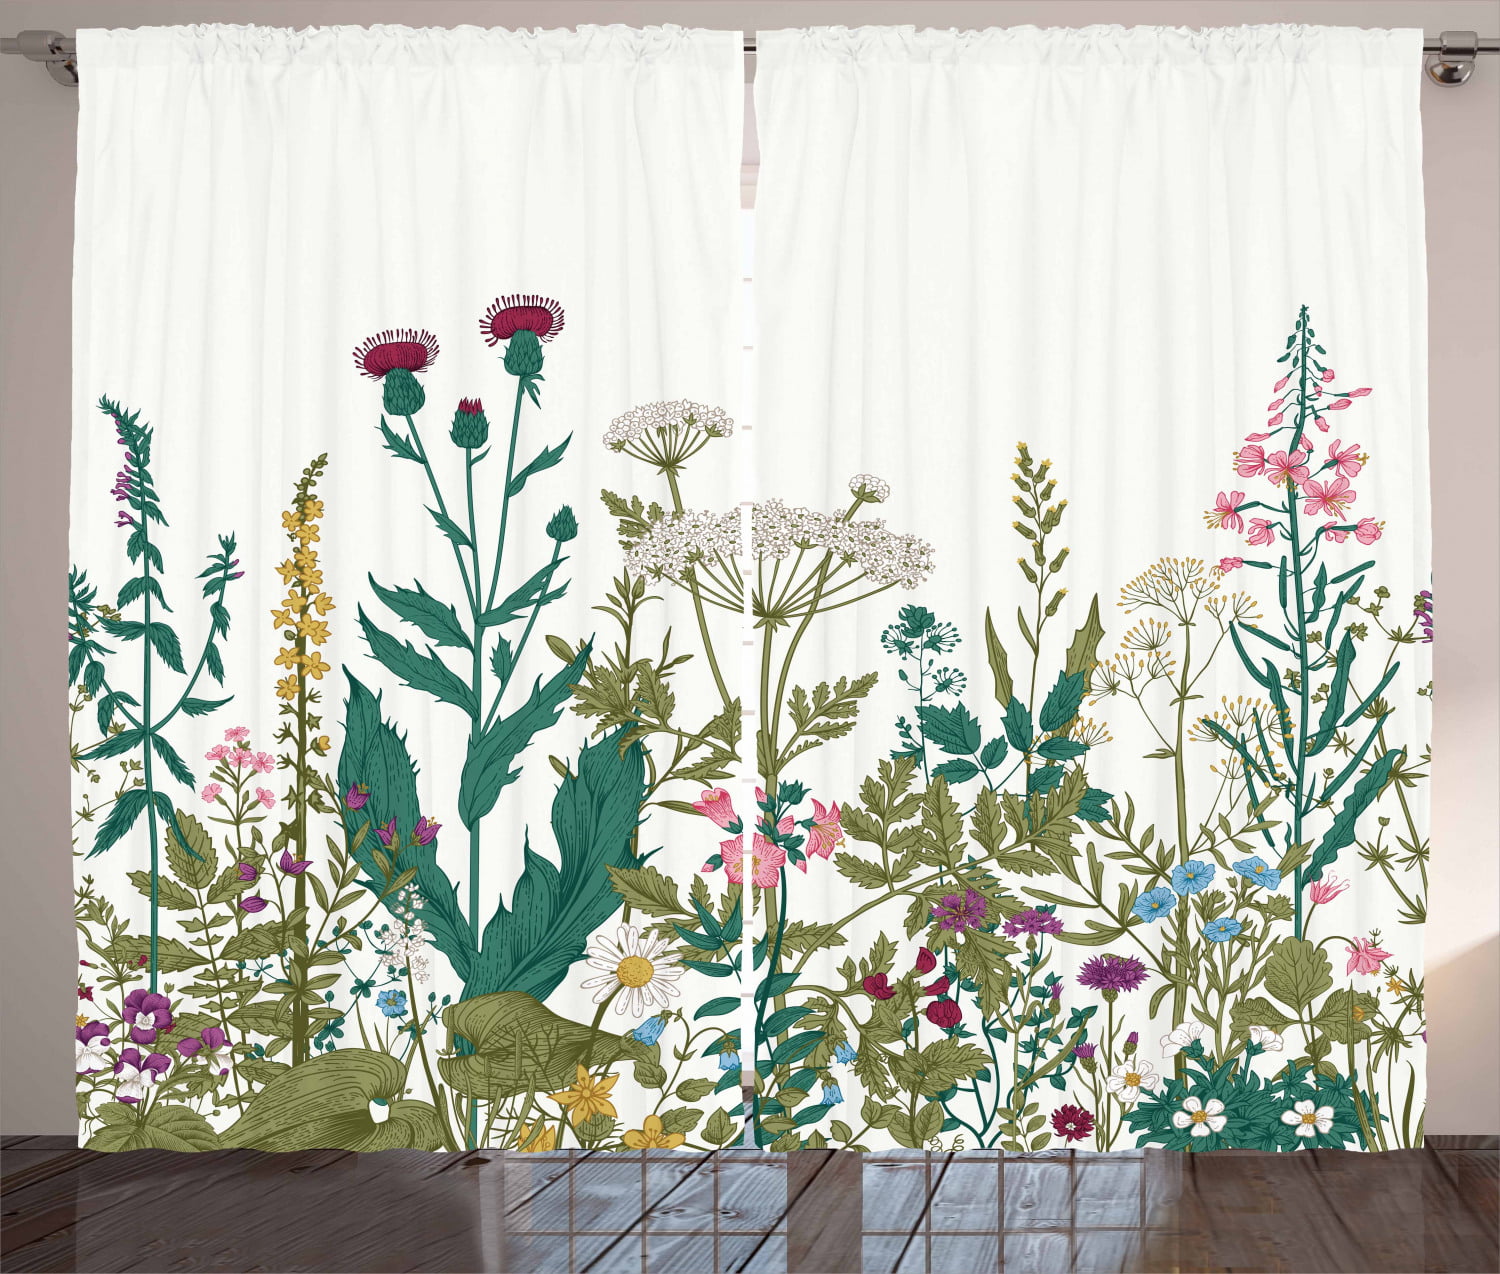 Possta Decor Blackout Window Curtain Watercolor Spring Natural Flowers Thermal Insulated Window Drapes Garden Floral Room Darkening Treatments with Grommet Top for Living Room Bedroom 52x36In